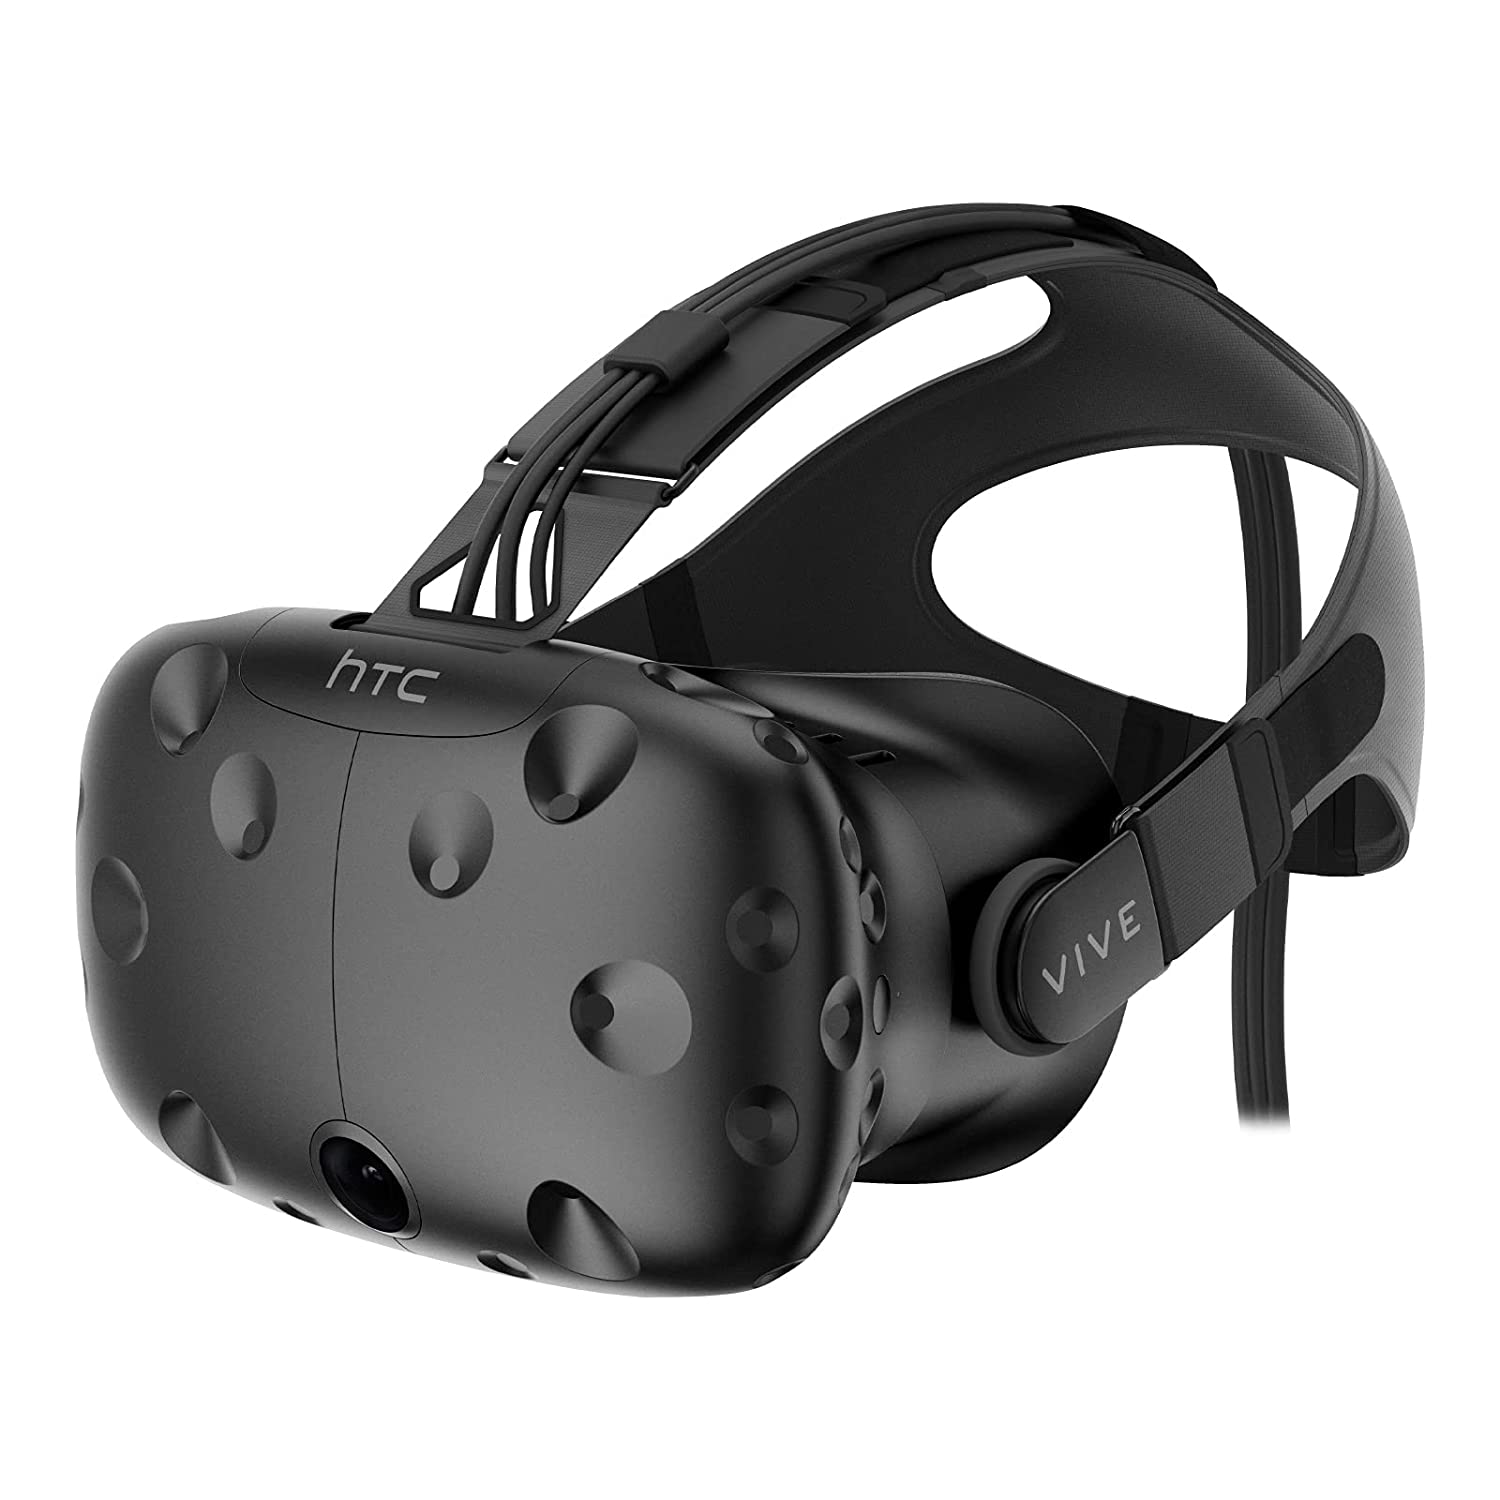 HTC Vive VR Headset and Controllers, Black